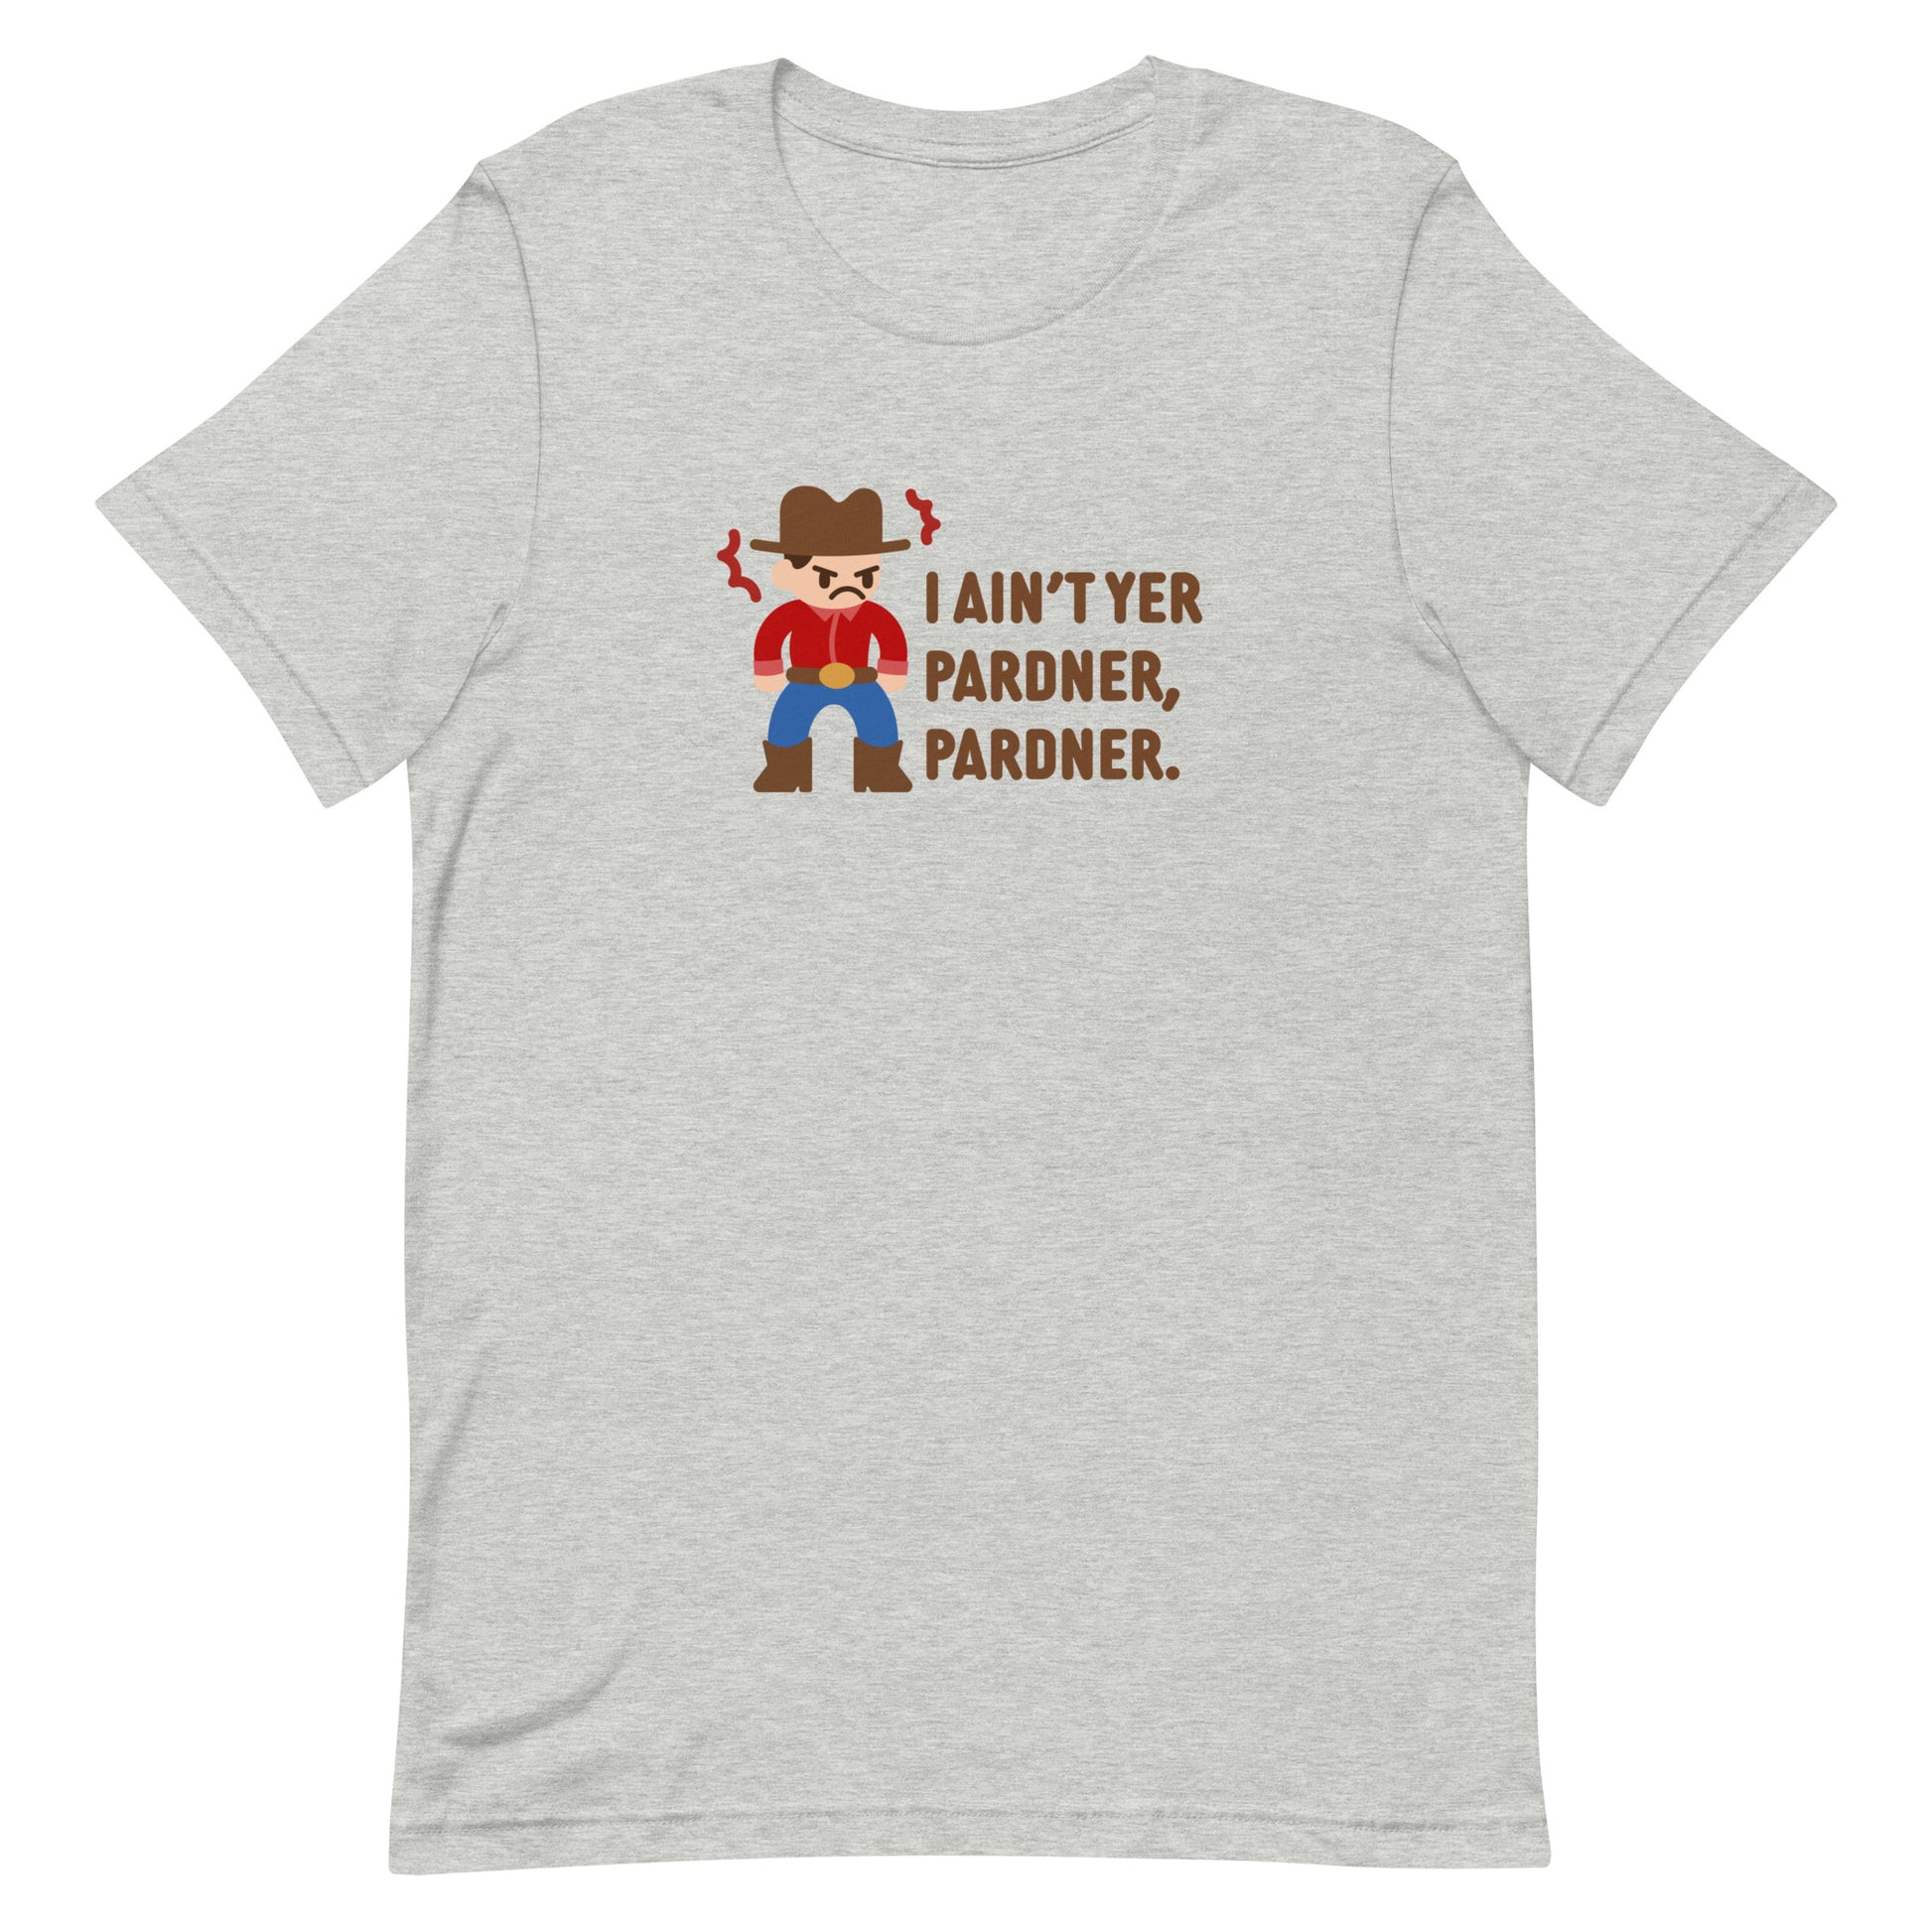 A grey crewneck t-shirt featuring an illustration of a grumpy cowboy wearing a red shirt. Text alongside the cowboy reads "I ain't yer pardner, pardner."